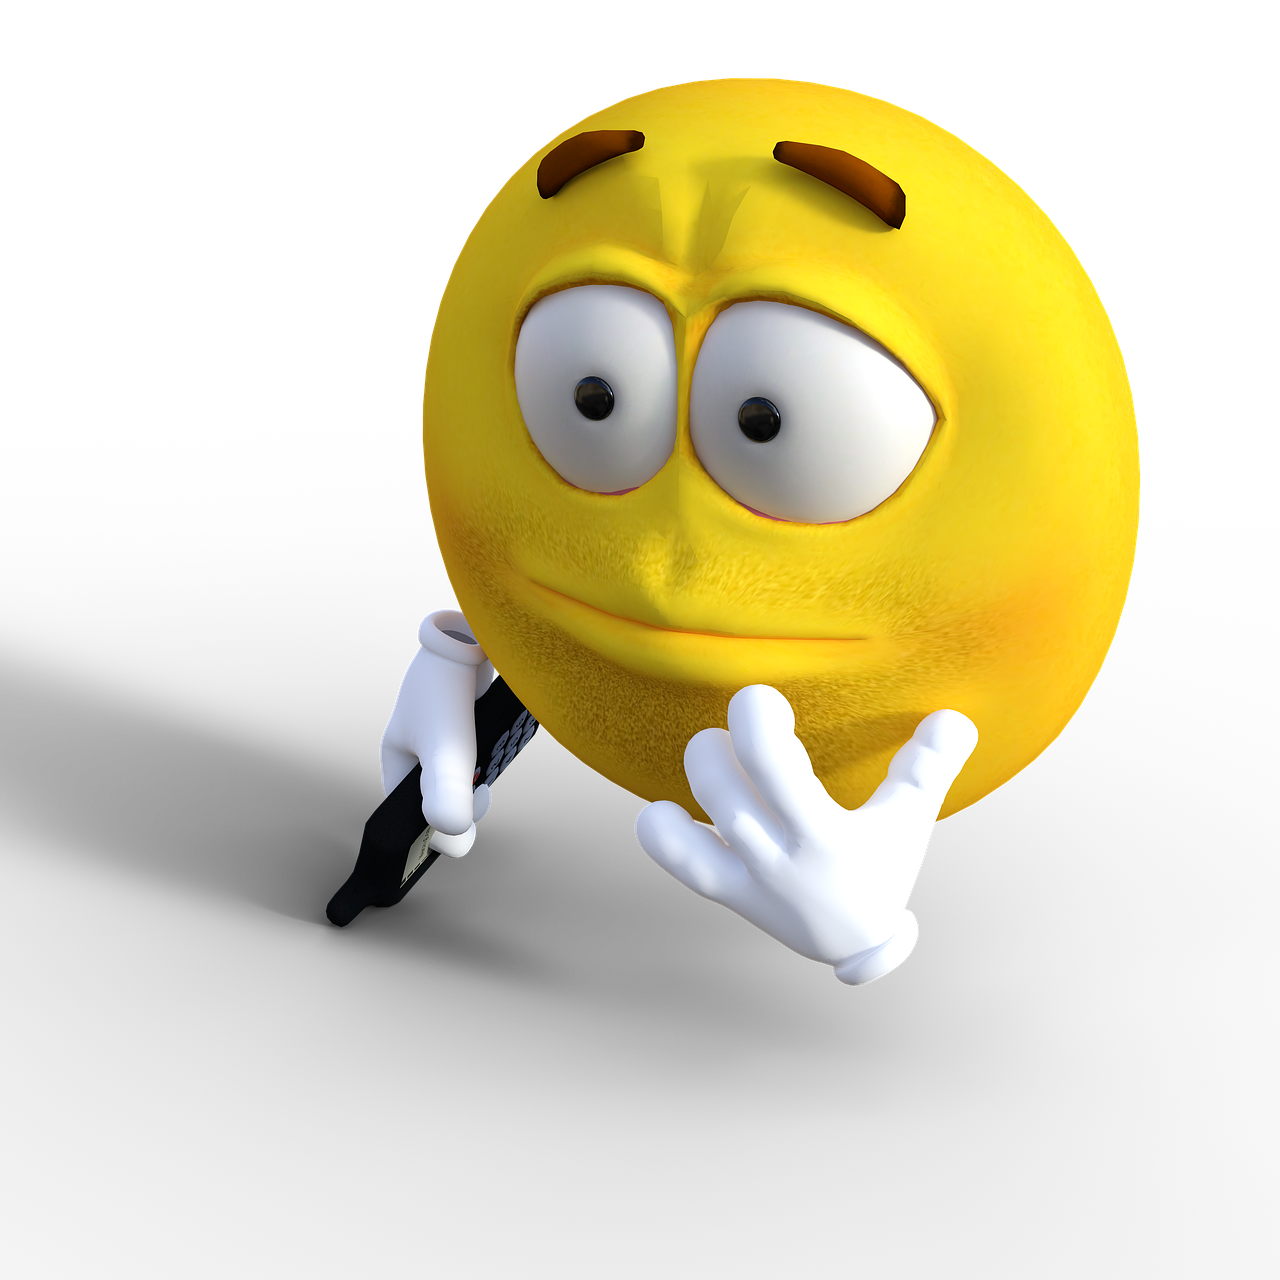 a close up of a yellow smiley face on a black background, a 3D render, happening, desperate pose, here is one olive, he is greeting you warmly, jump